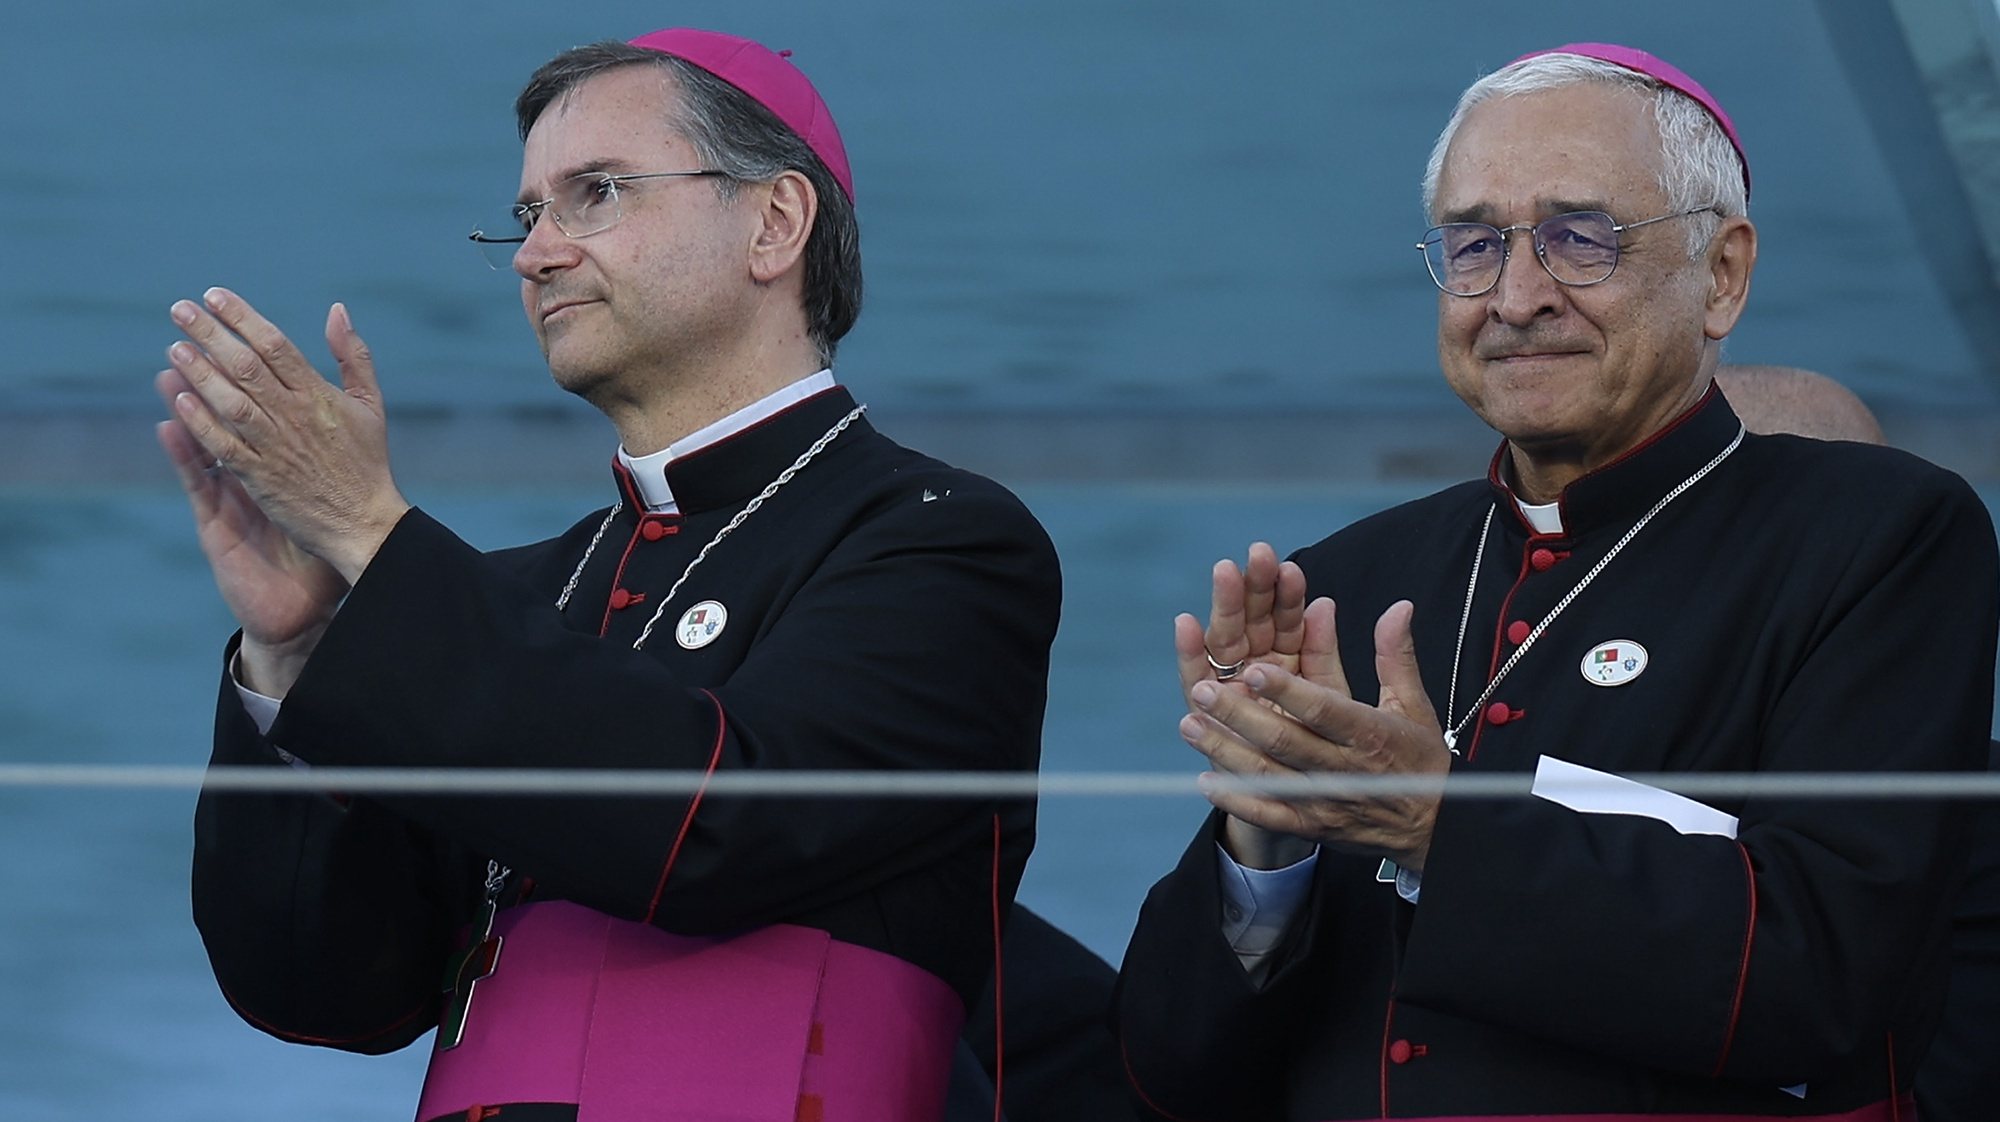 Lisbon auxiliary bishop, Americo Aguiar (L) and Leiria-Fatima bishop, D. Jose Ornelas Carvalho, attend the Stations of the Cross with the presence of Pope Francis (not pictured) on Meeting Hill at Parque Eduardo VII in Lisbon, Portugal, 04 August 2023. The Pontiff is in Portugal on the occasion of World Youth Day (WYD), one of the main events of the Church that gathers the Pope with youngsters from around the world. JOSE SENA GOULAO/LUSA/POOL